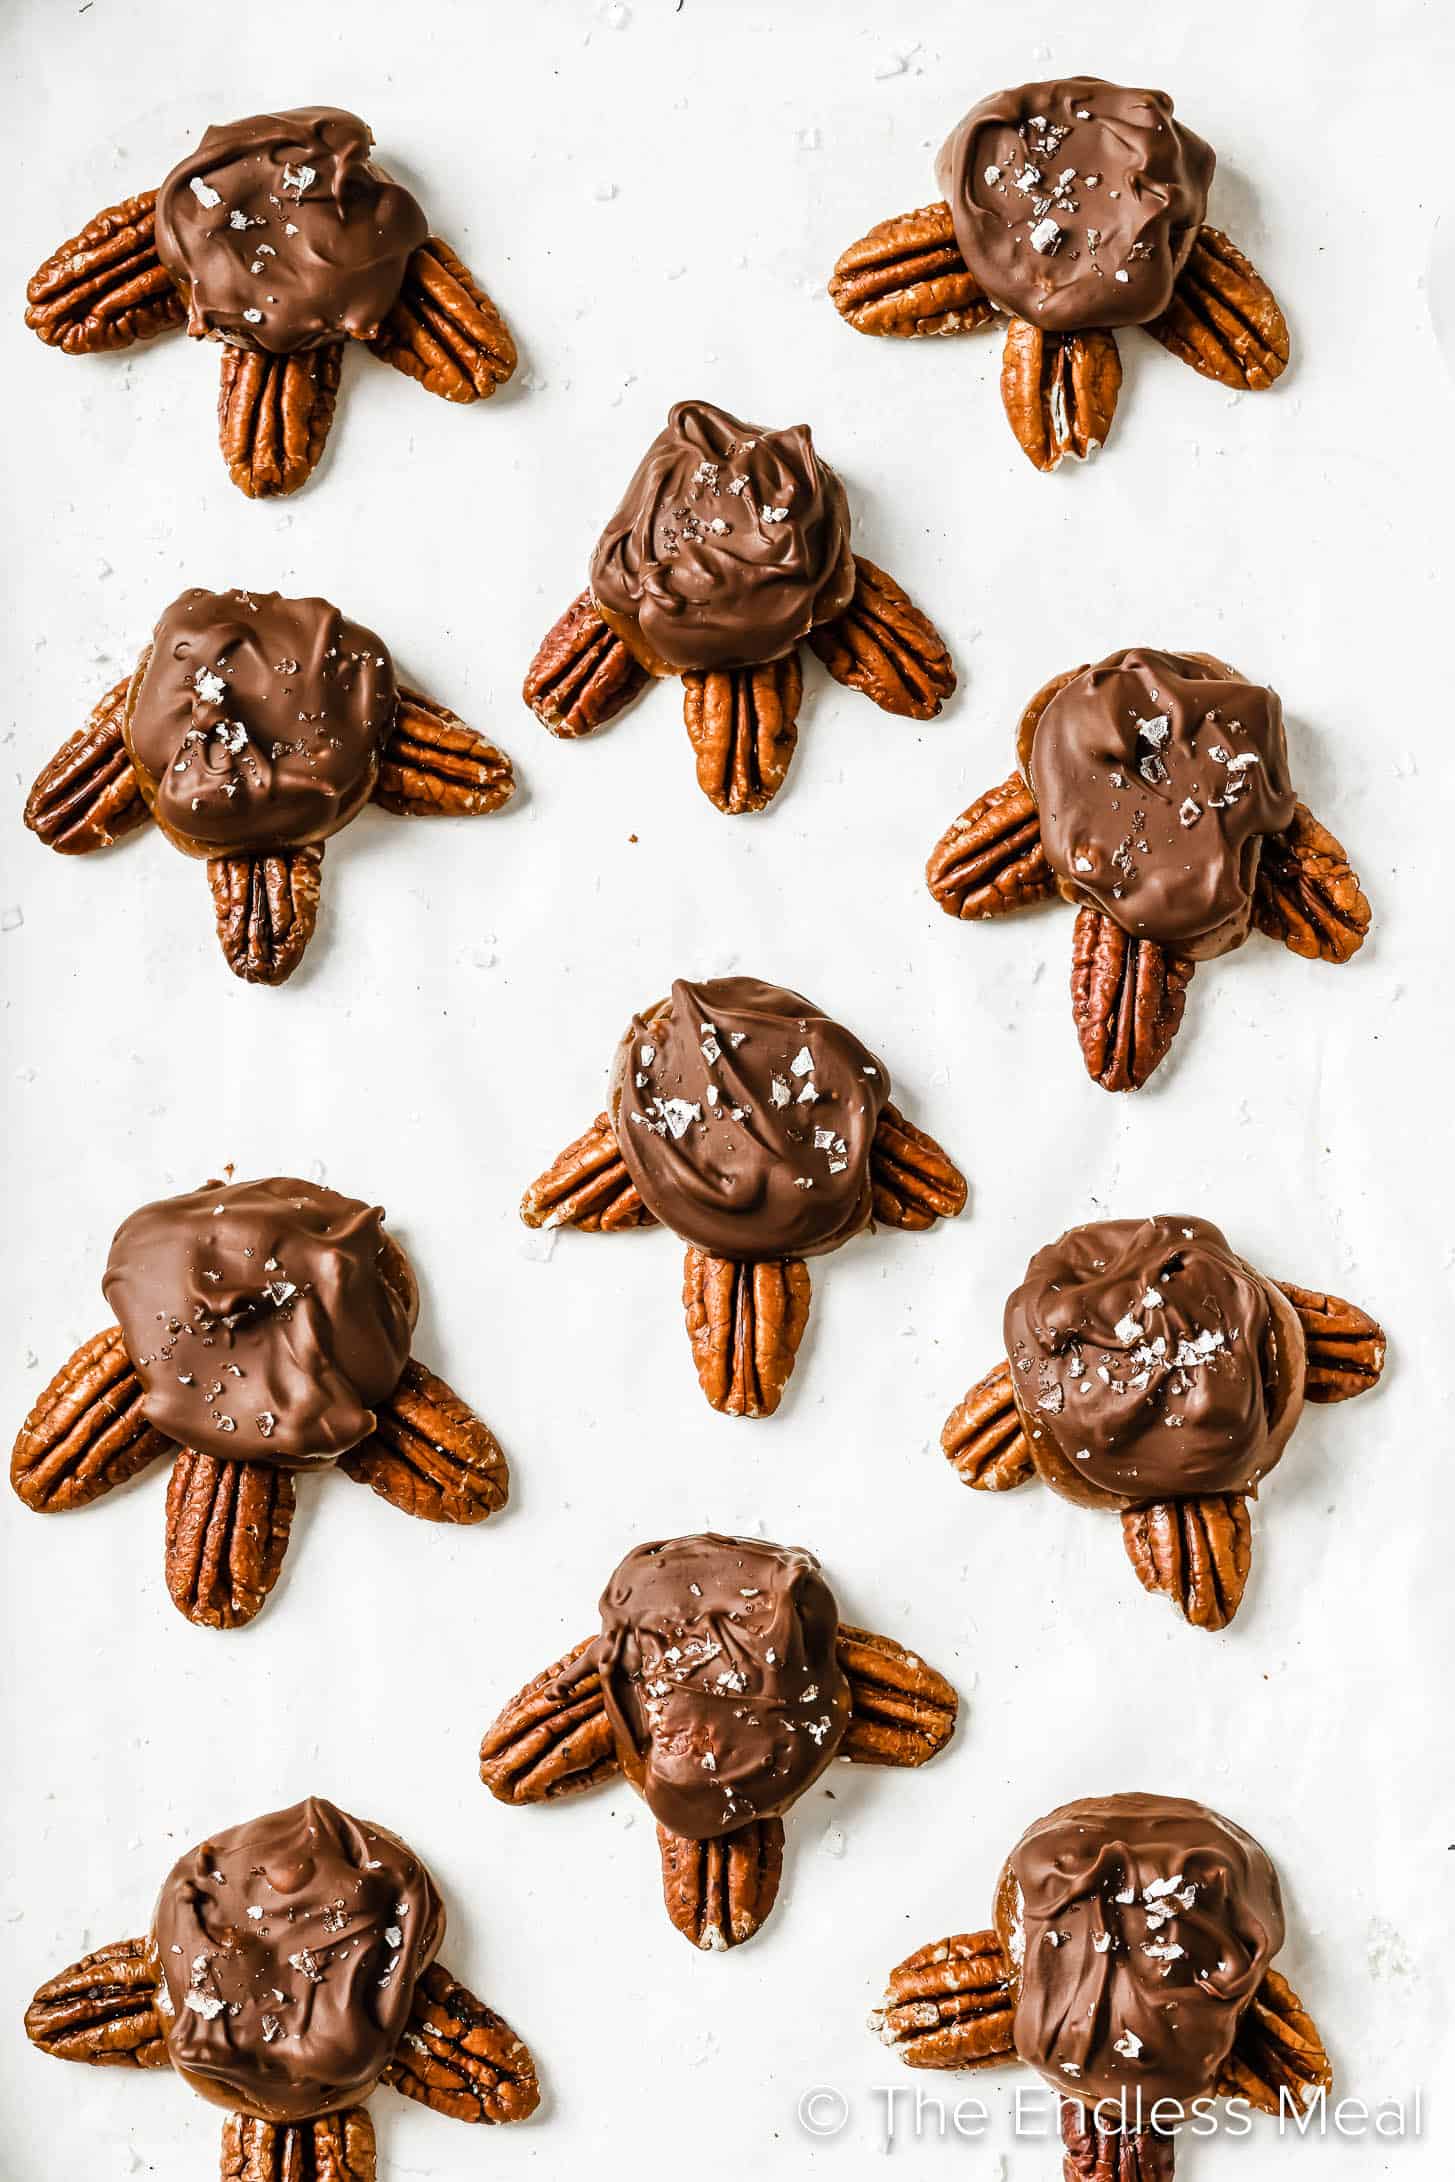 Homemade Chocolate Turtles lined up on parchment paper